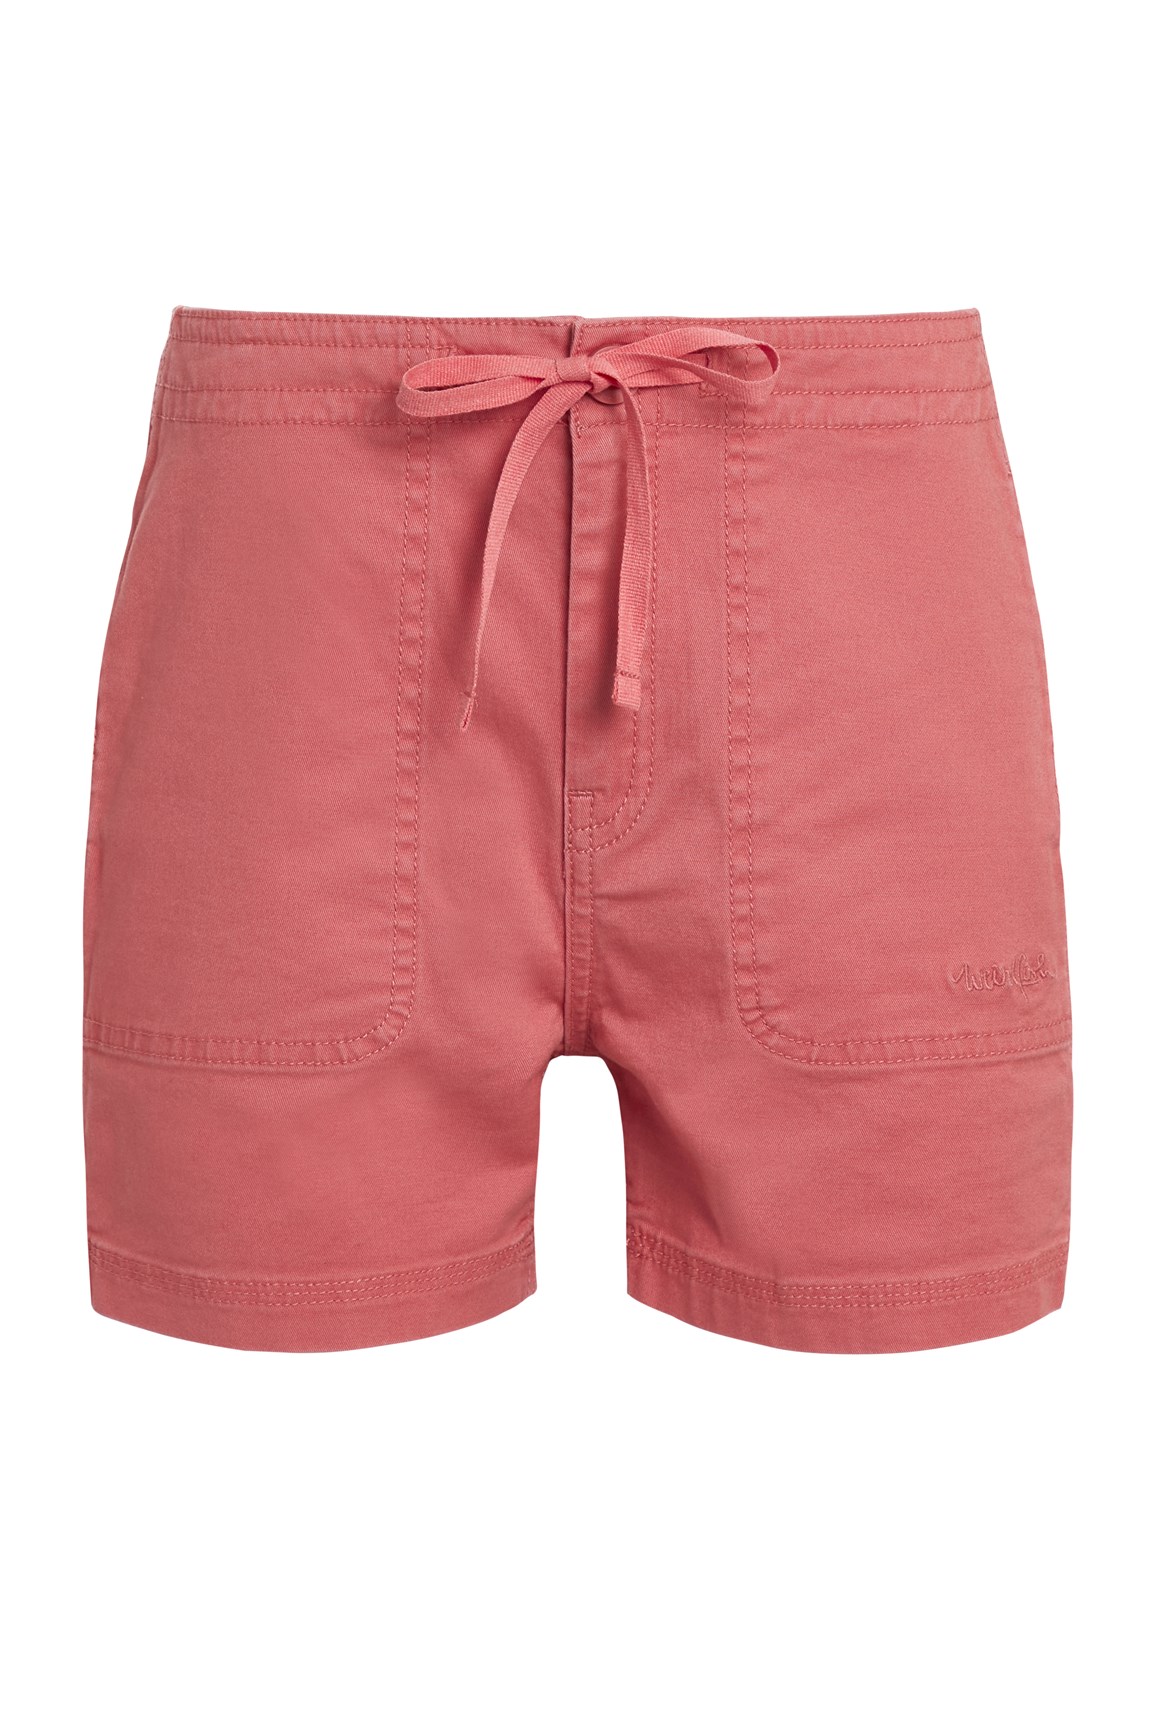 Weird Fish Willoughby Organic Cotton Shorts Tea Rose Size 8